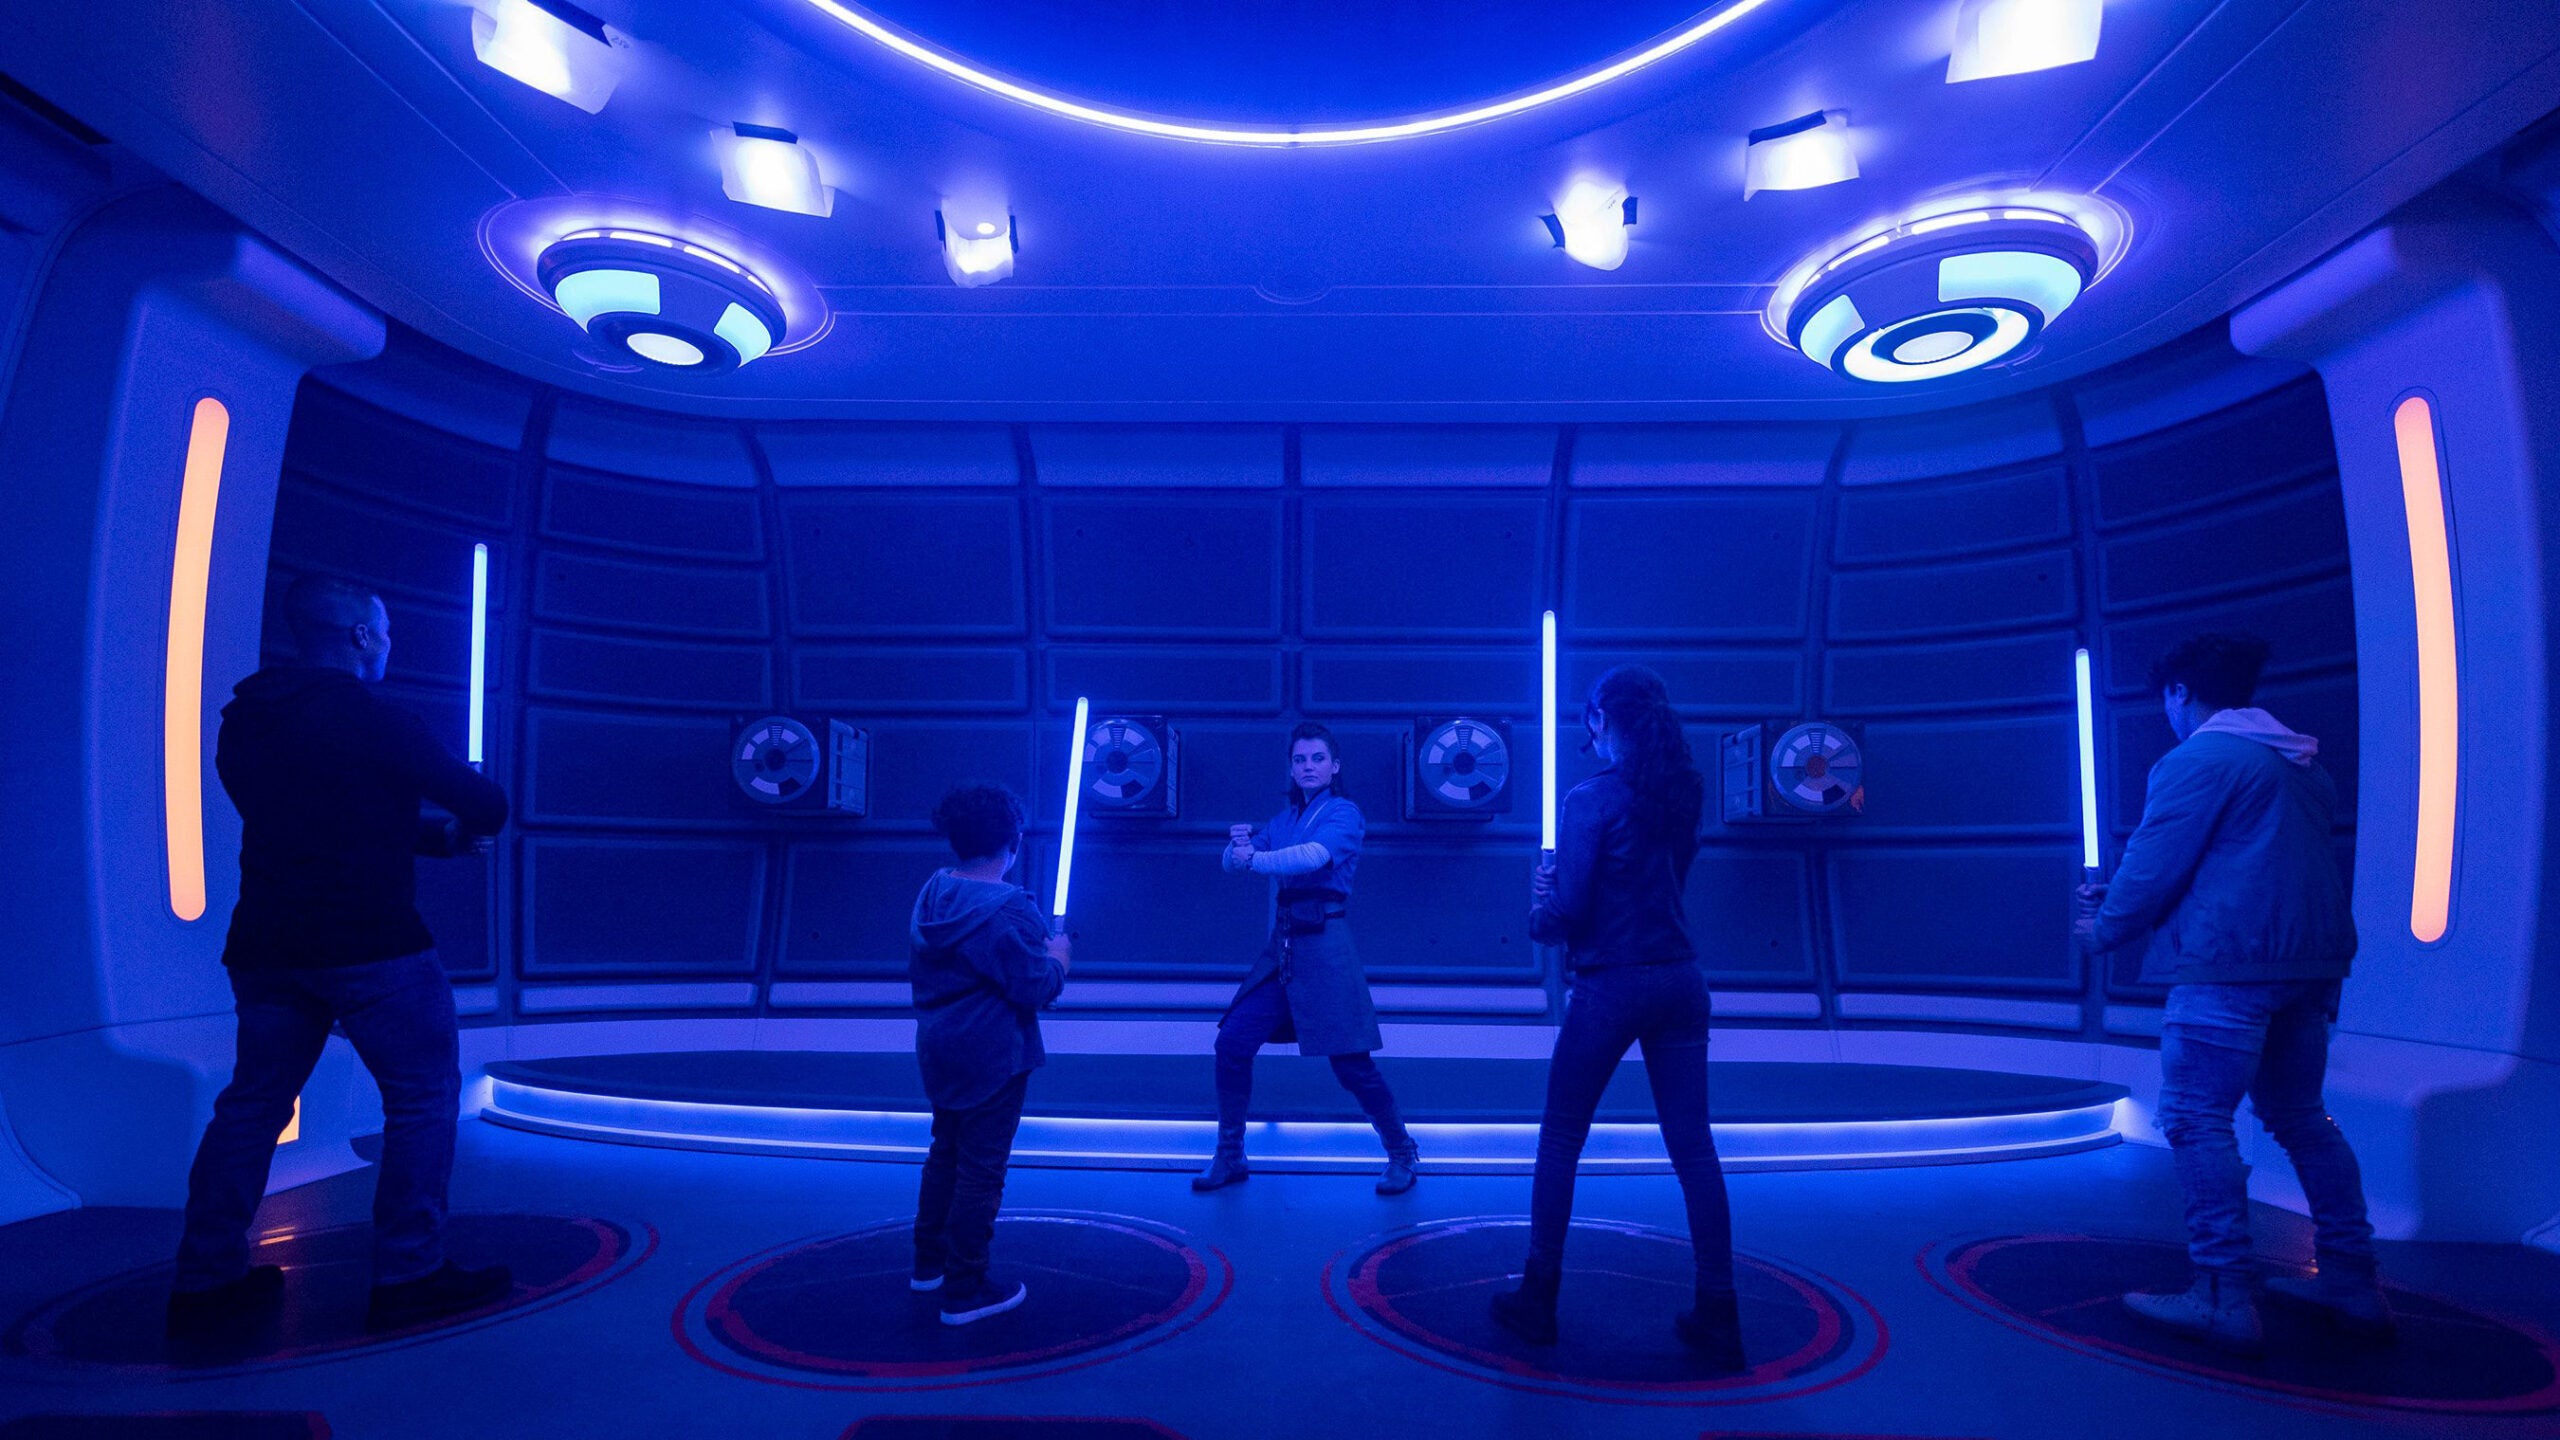 Passengers learn the ancient art of wielding a lightsaber in the Lightsaber Training Pod onboard the Halcyon starcruiser in Star Wars: Galactic Starcruiser at Walt Disney World Resort in Lake Buena Vista, Fla.